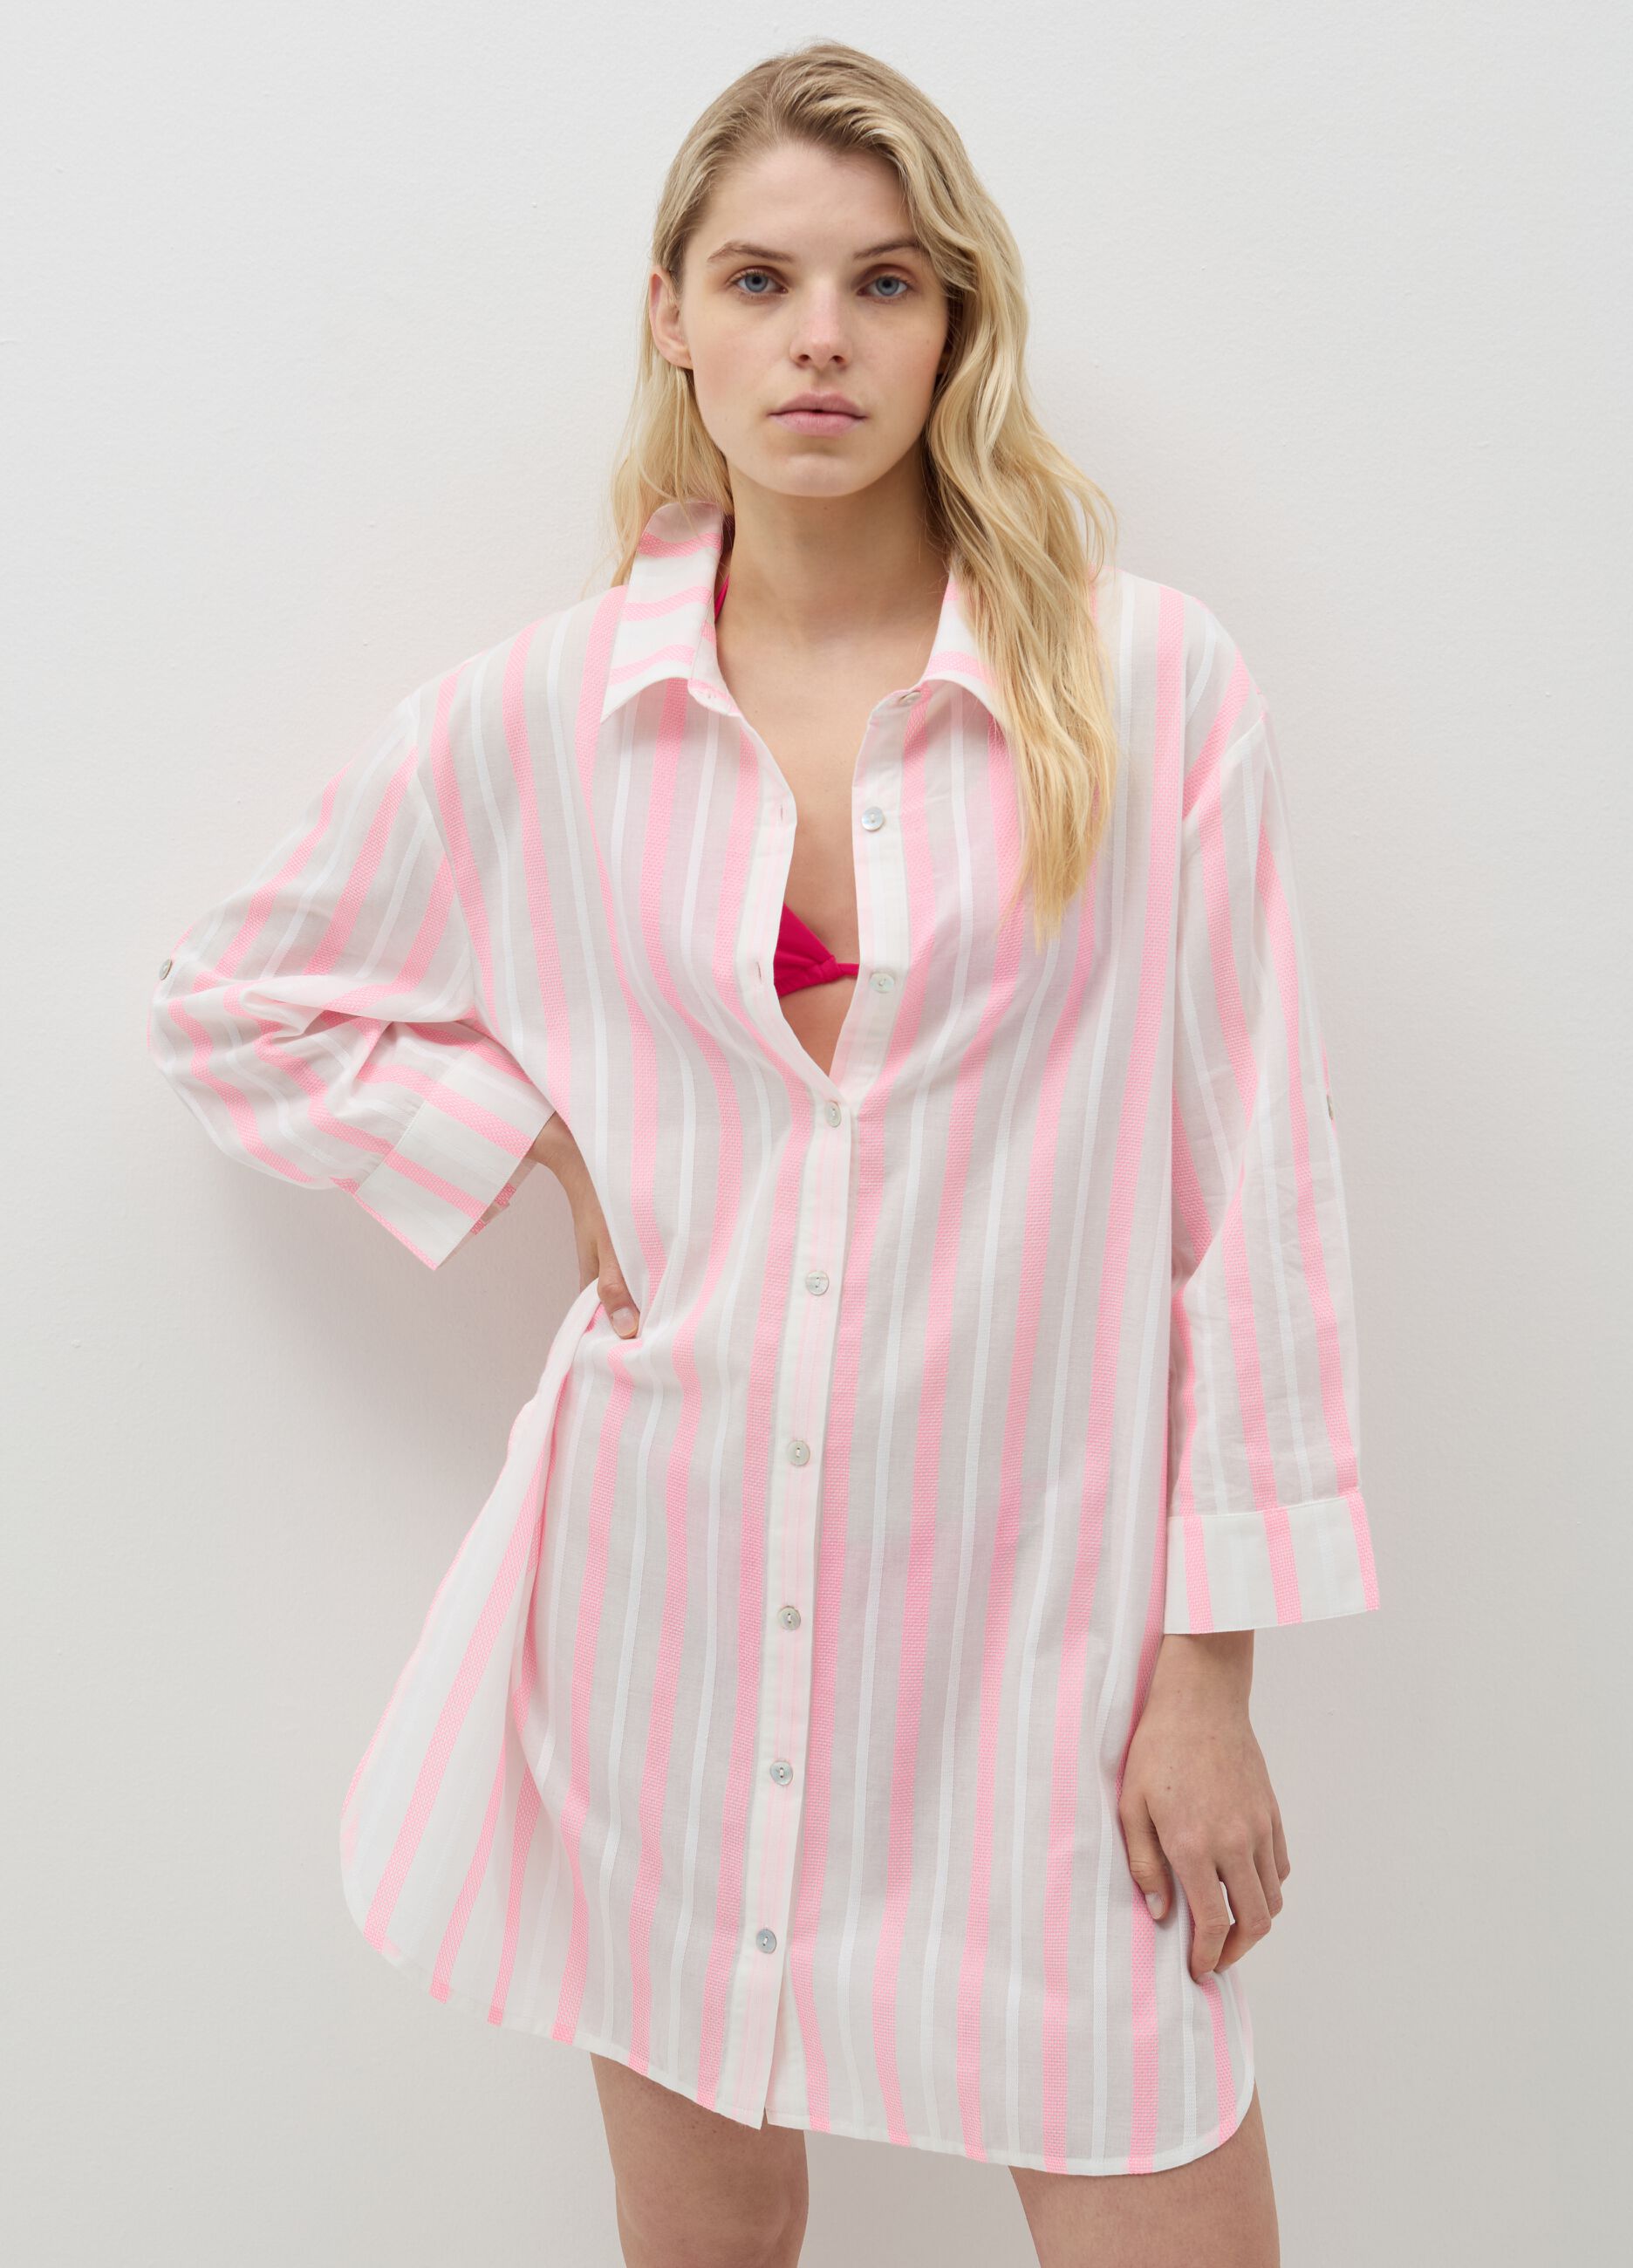 Striped beach cover-up shirt with embroidery